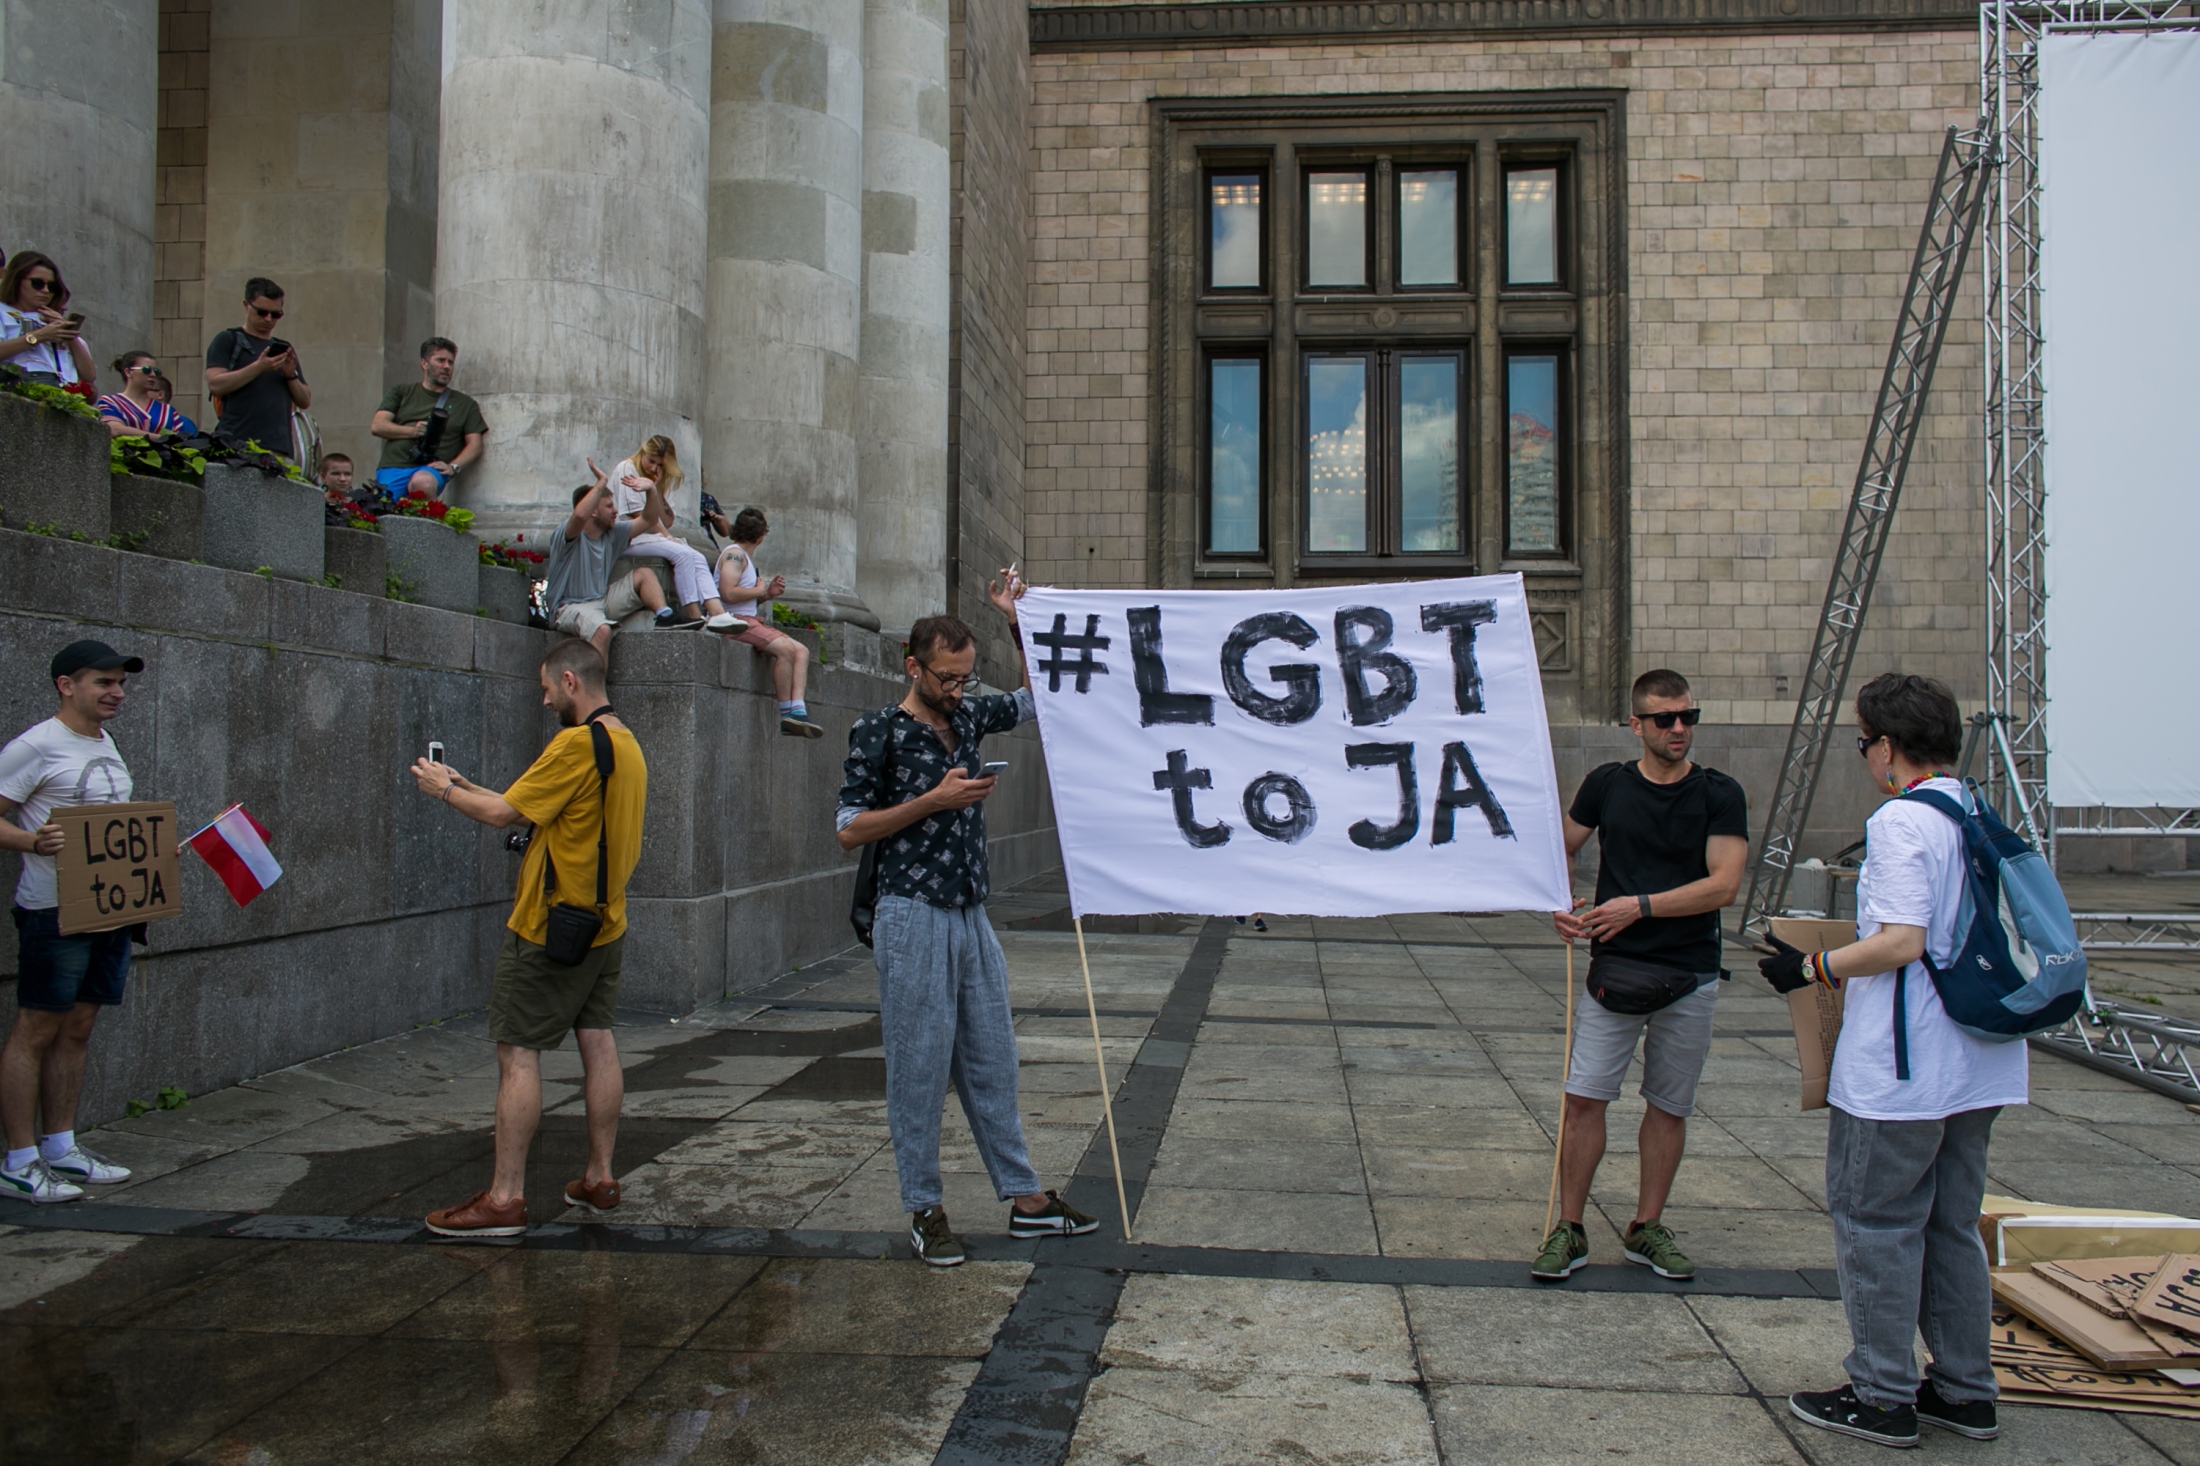 LGBT POLAND  - for NYTimes  - Solidarity with the L.G.B.T. community in Bialystok....